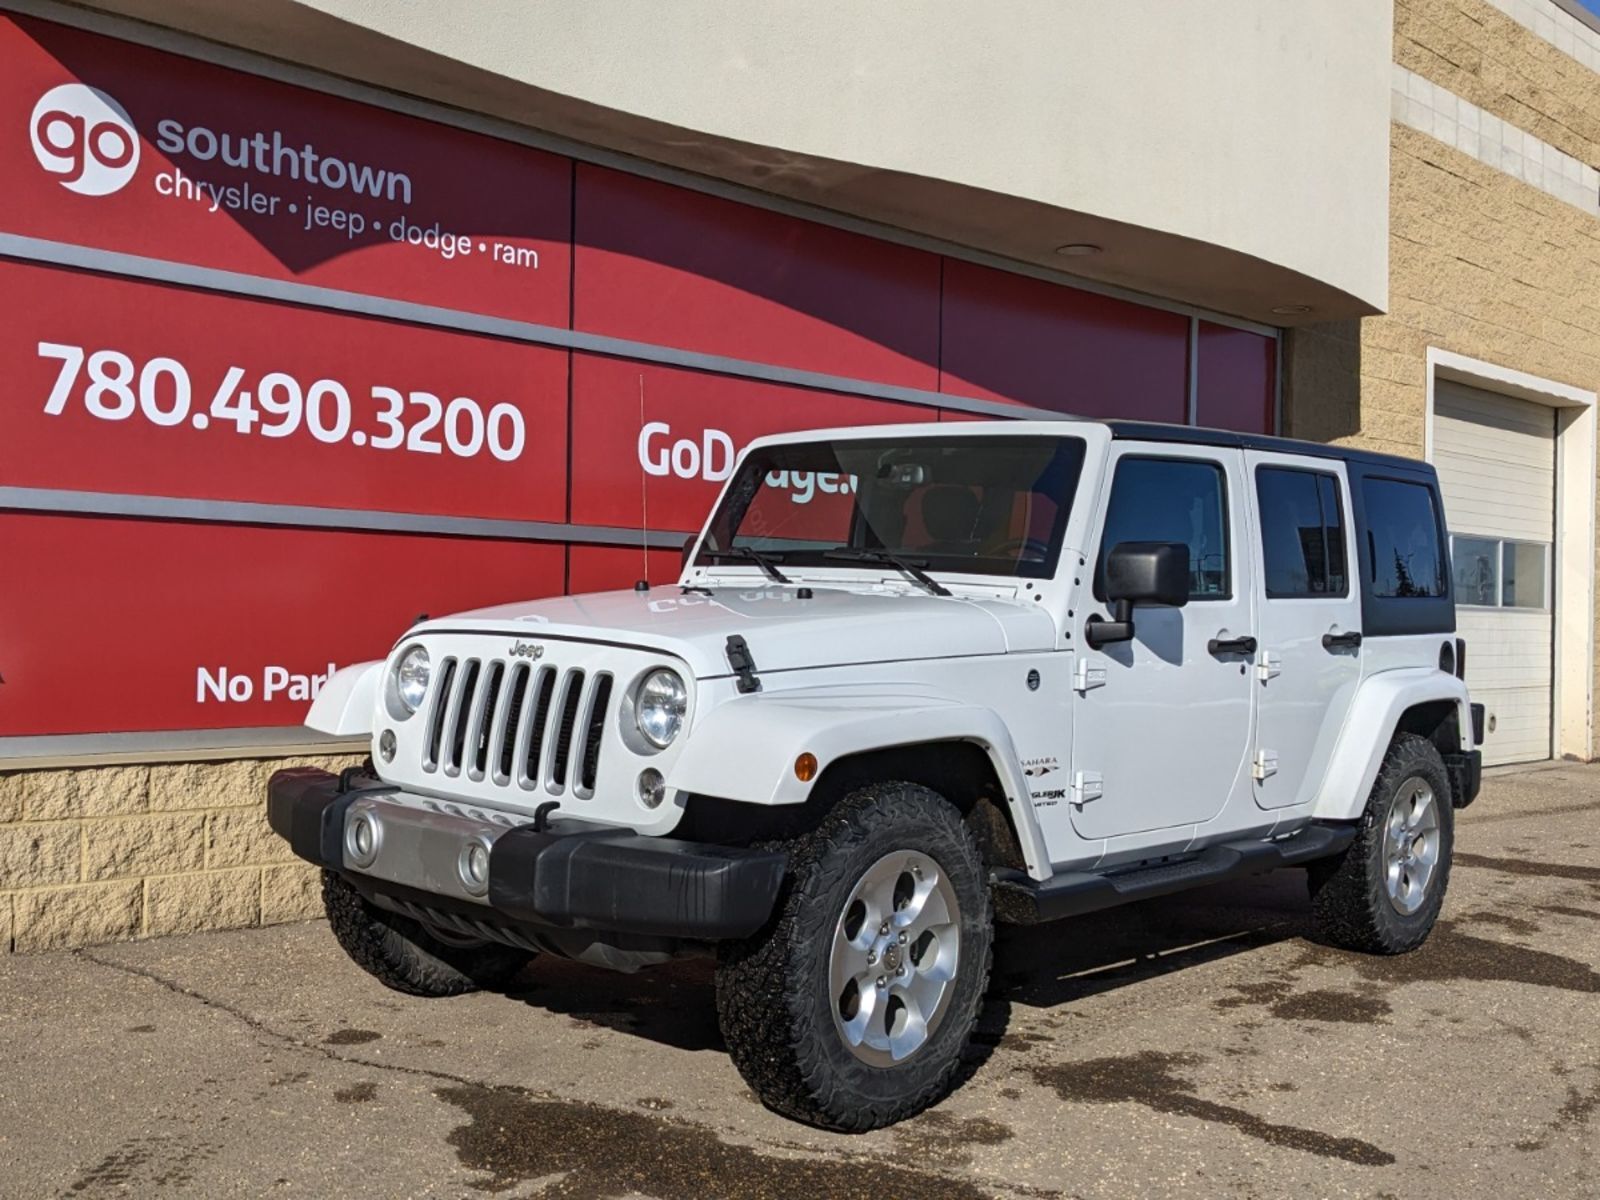 2018 Jeep Wrangler JK Unlimited UNLIMITED SAHARA IN BRIGHT WHITE EQUIPPED WITH A 3